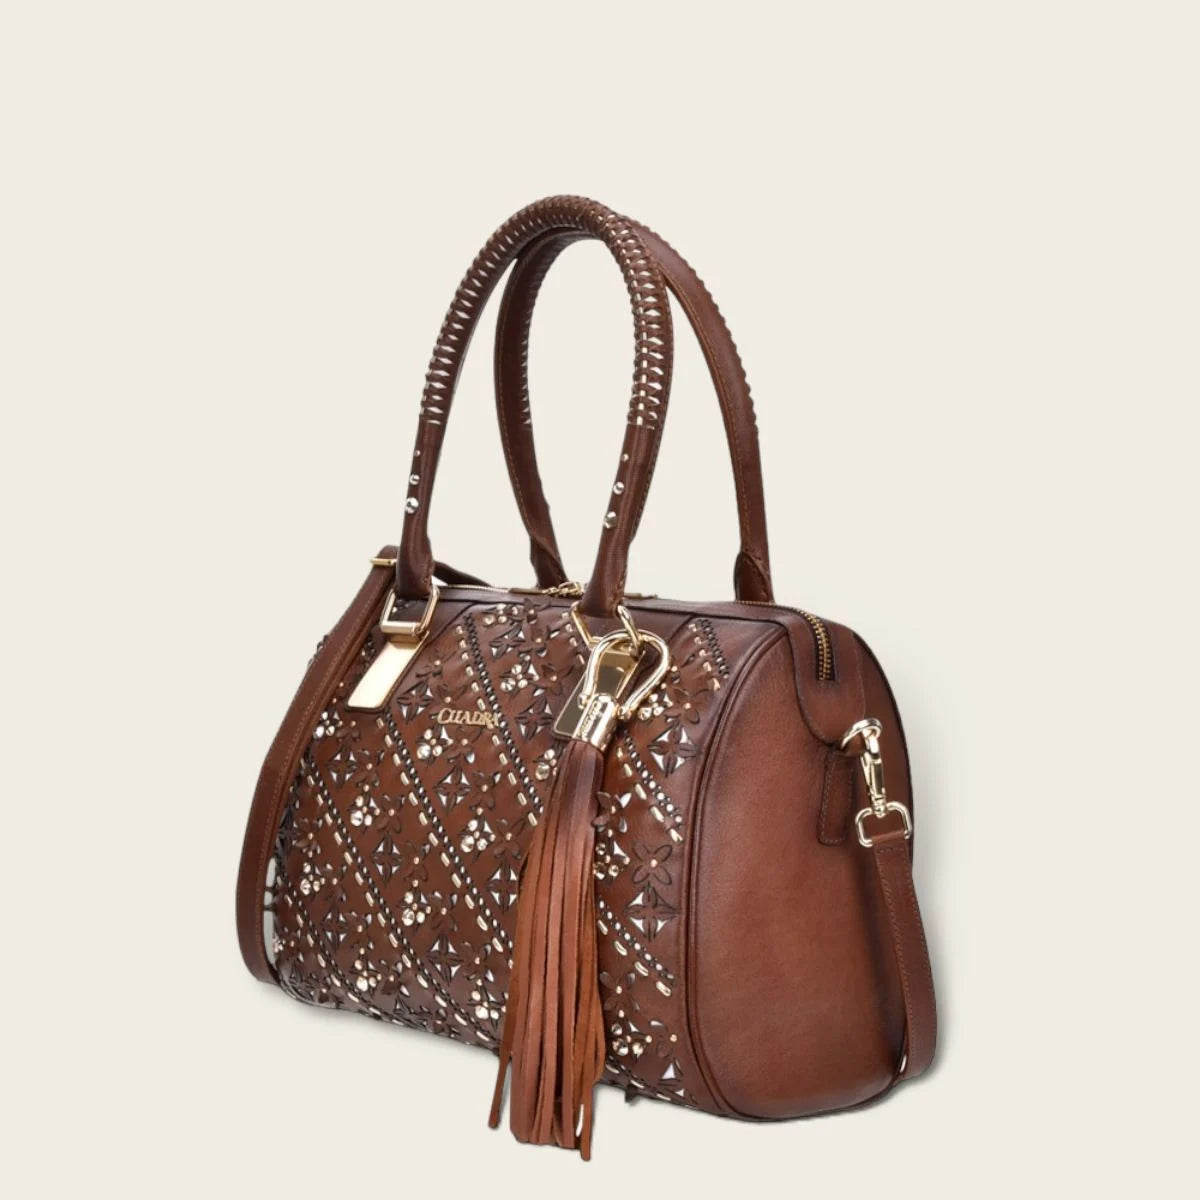 Brown handbag with Austrian crystals and perforated floral motifs